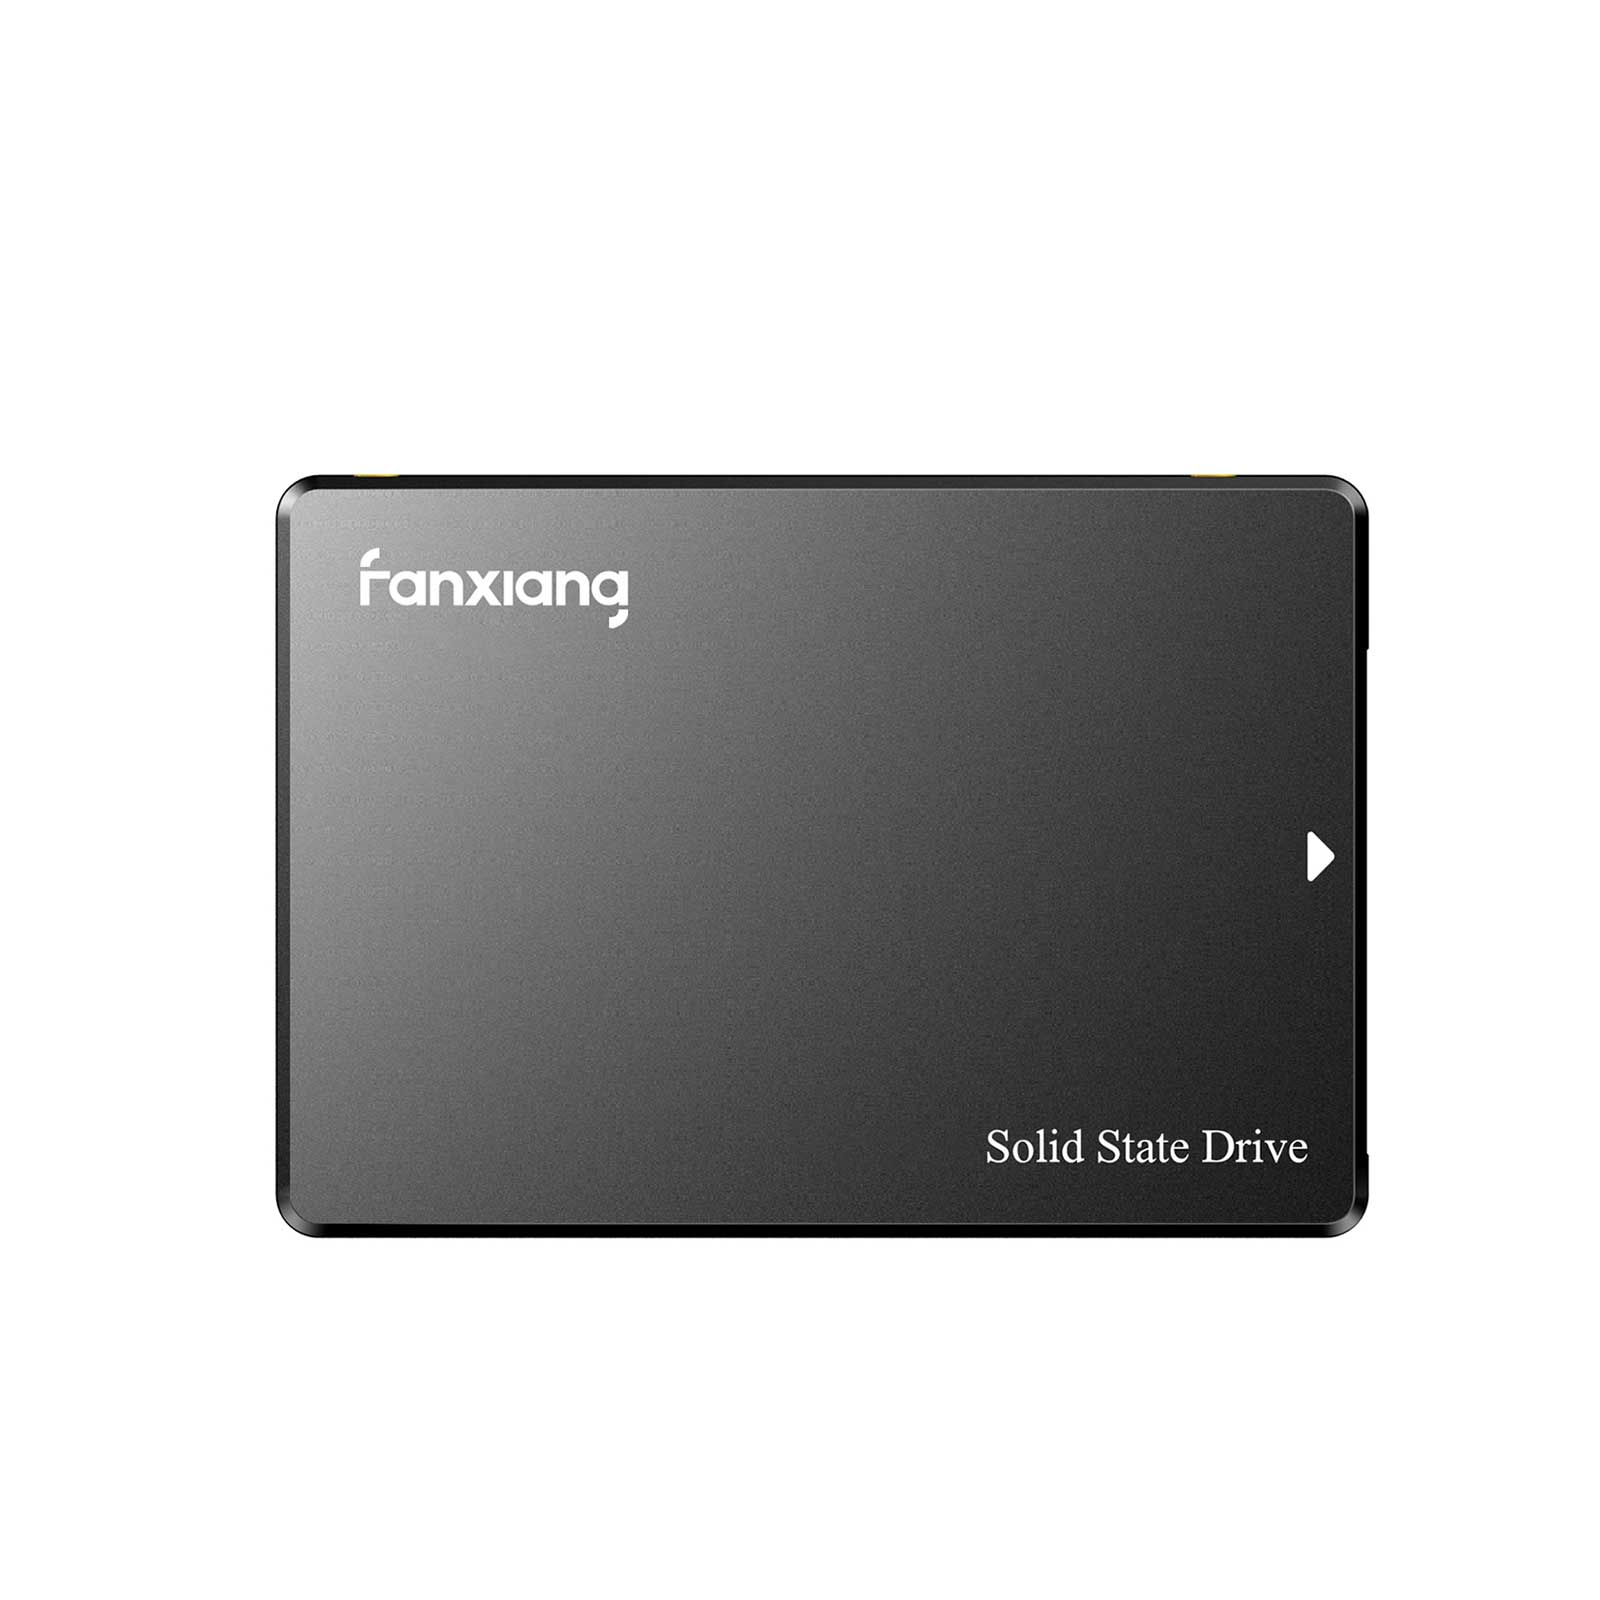 Fanxiang S101 512GB SSD 2.5 inches SATA III Internal Solid State Hard  Drive, up to 550MB/s 